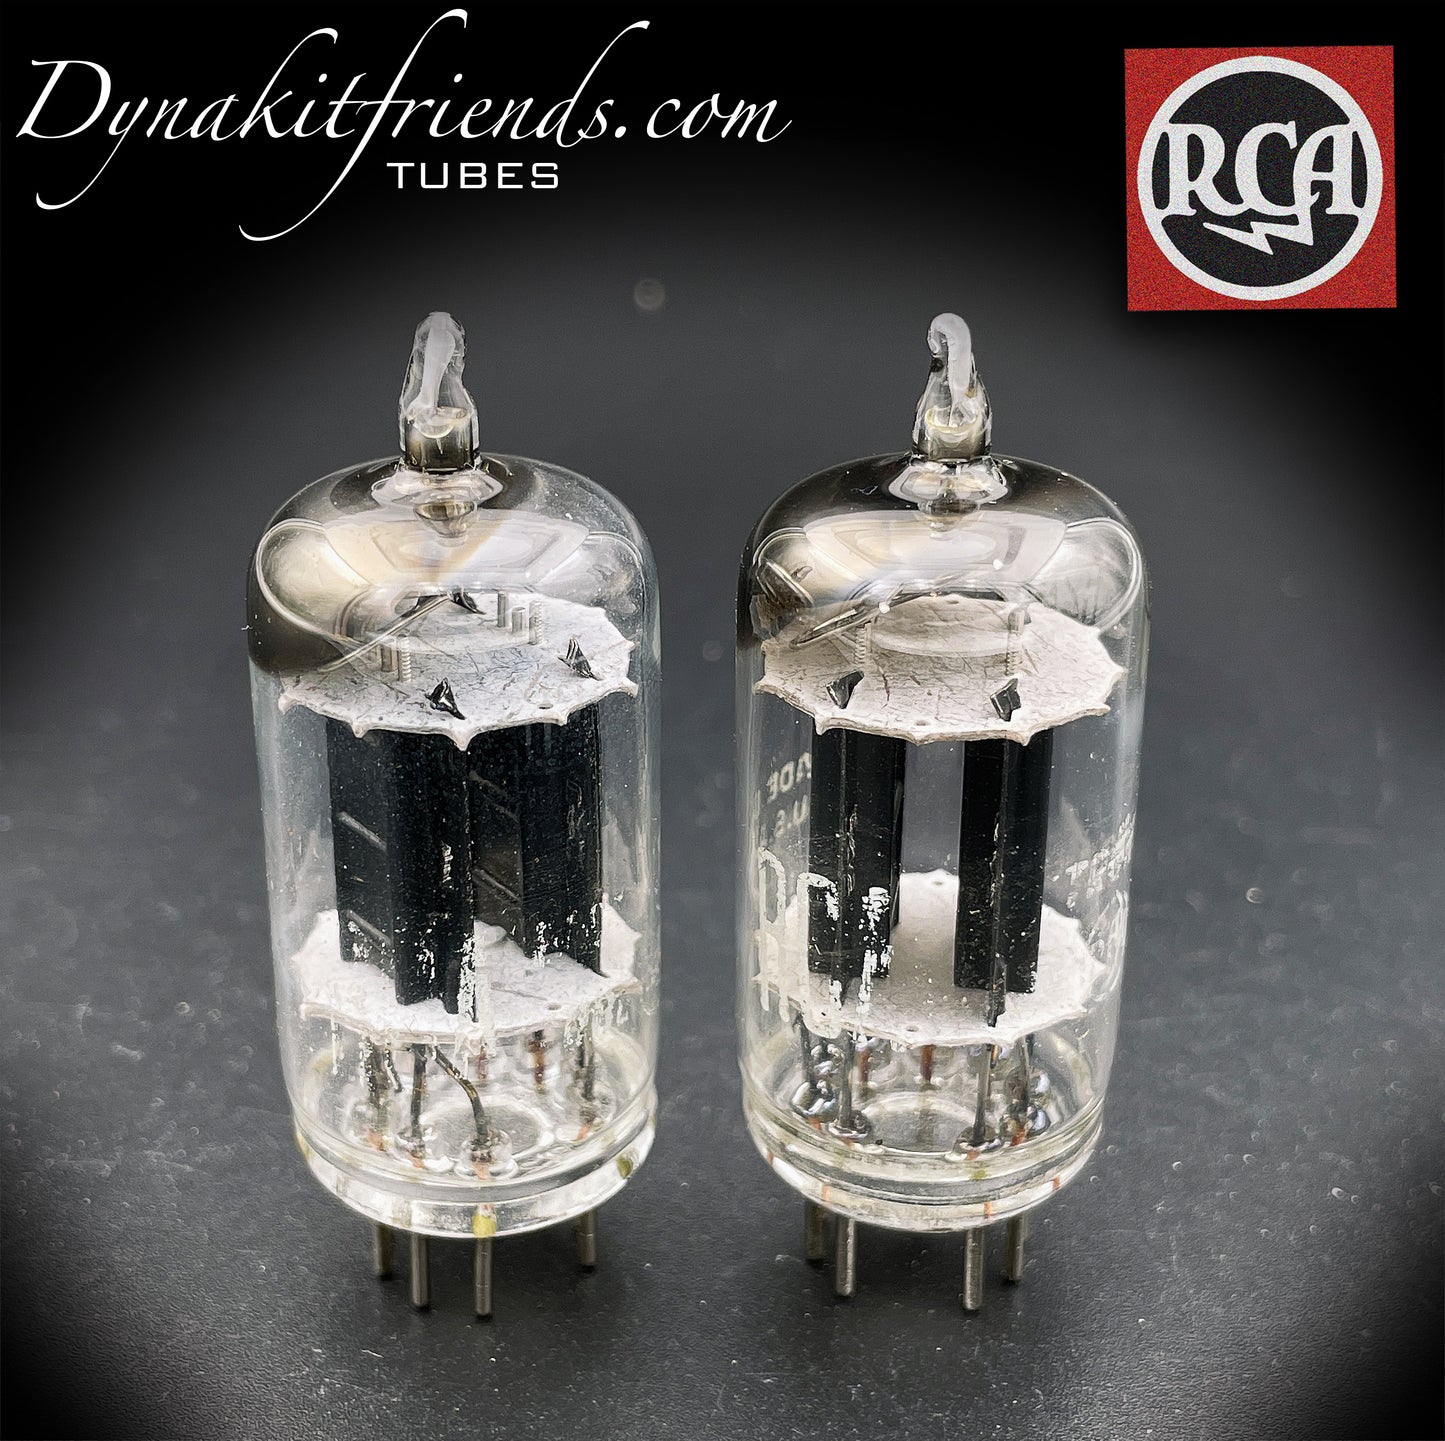 12AX7 ( ECC83 ) RCA NOS Long Black Plates [] Tilted Getter Matched Tubes MADE IN USA '50s